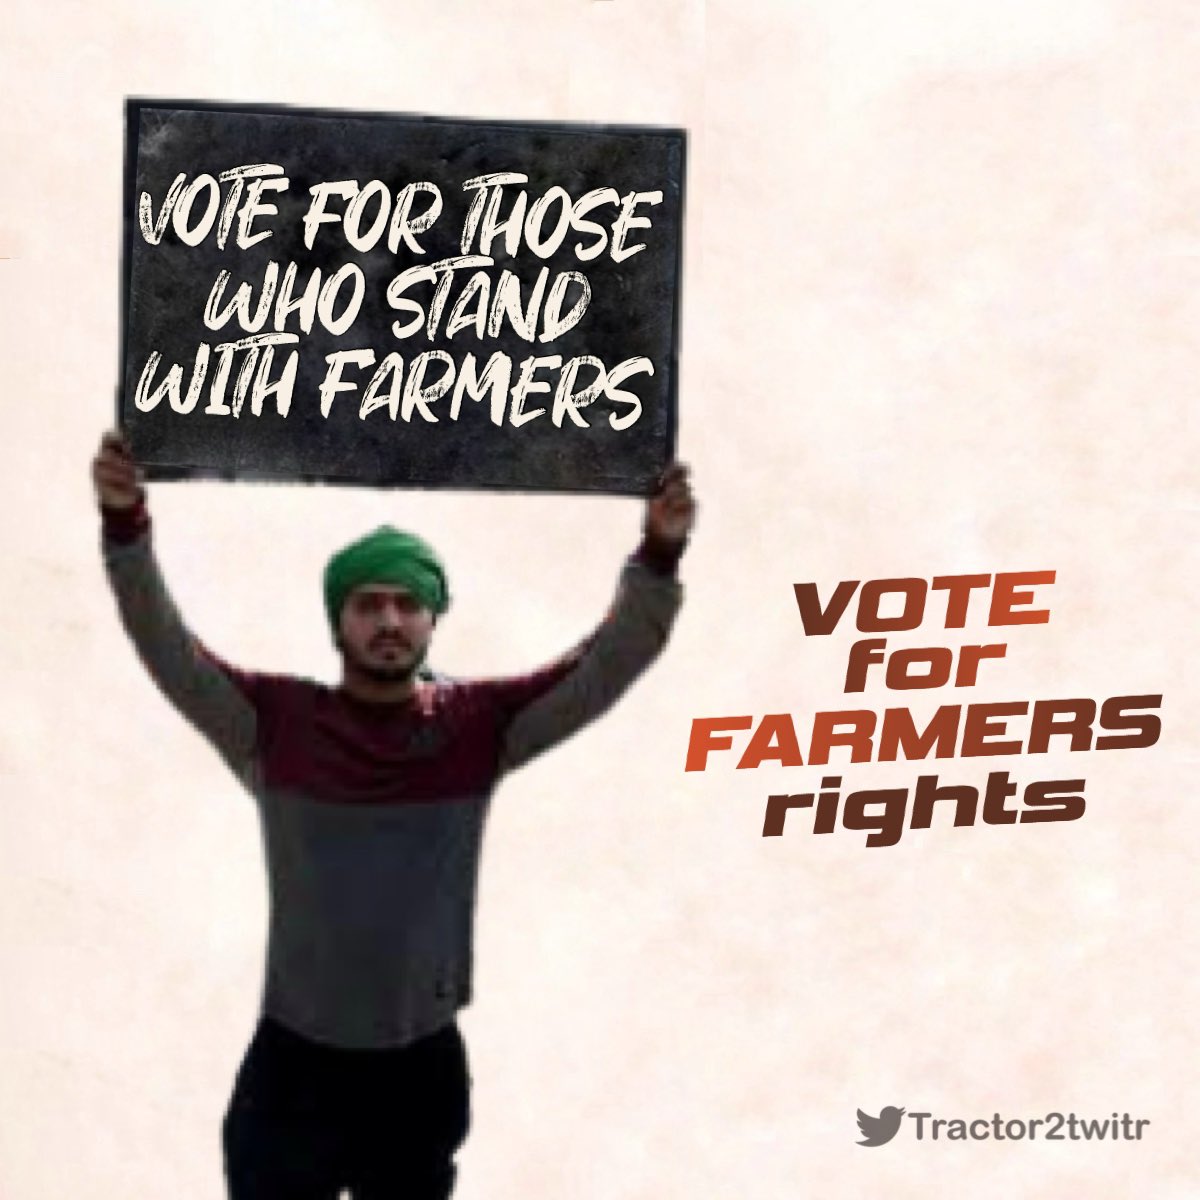 vote for those which work in the faver of people's 

not for corporate

#Vote4FarmersRights